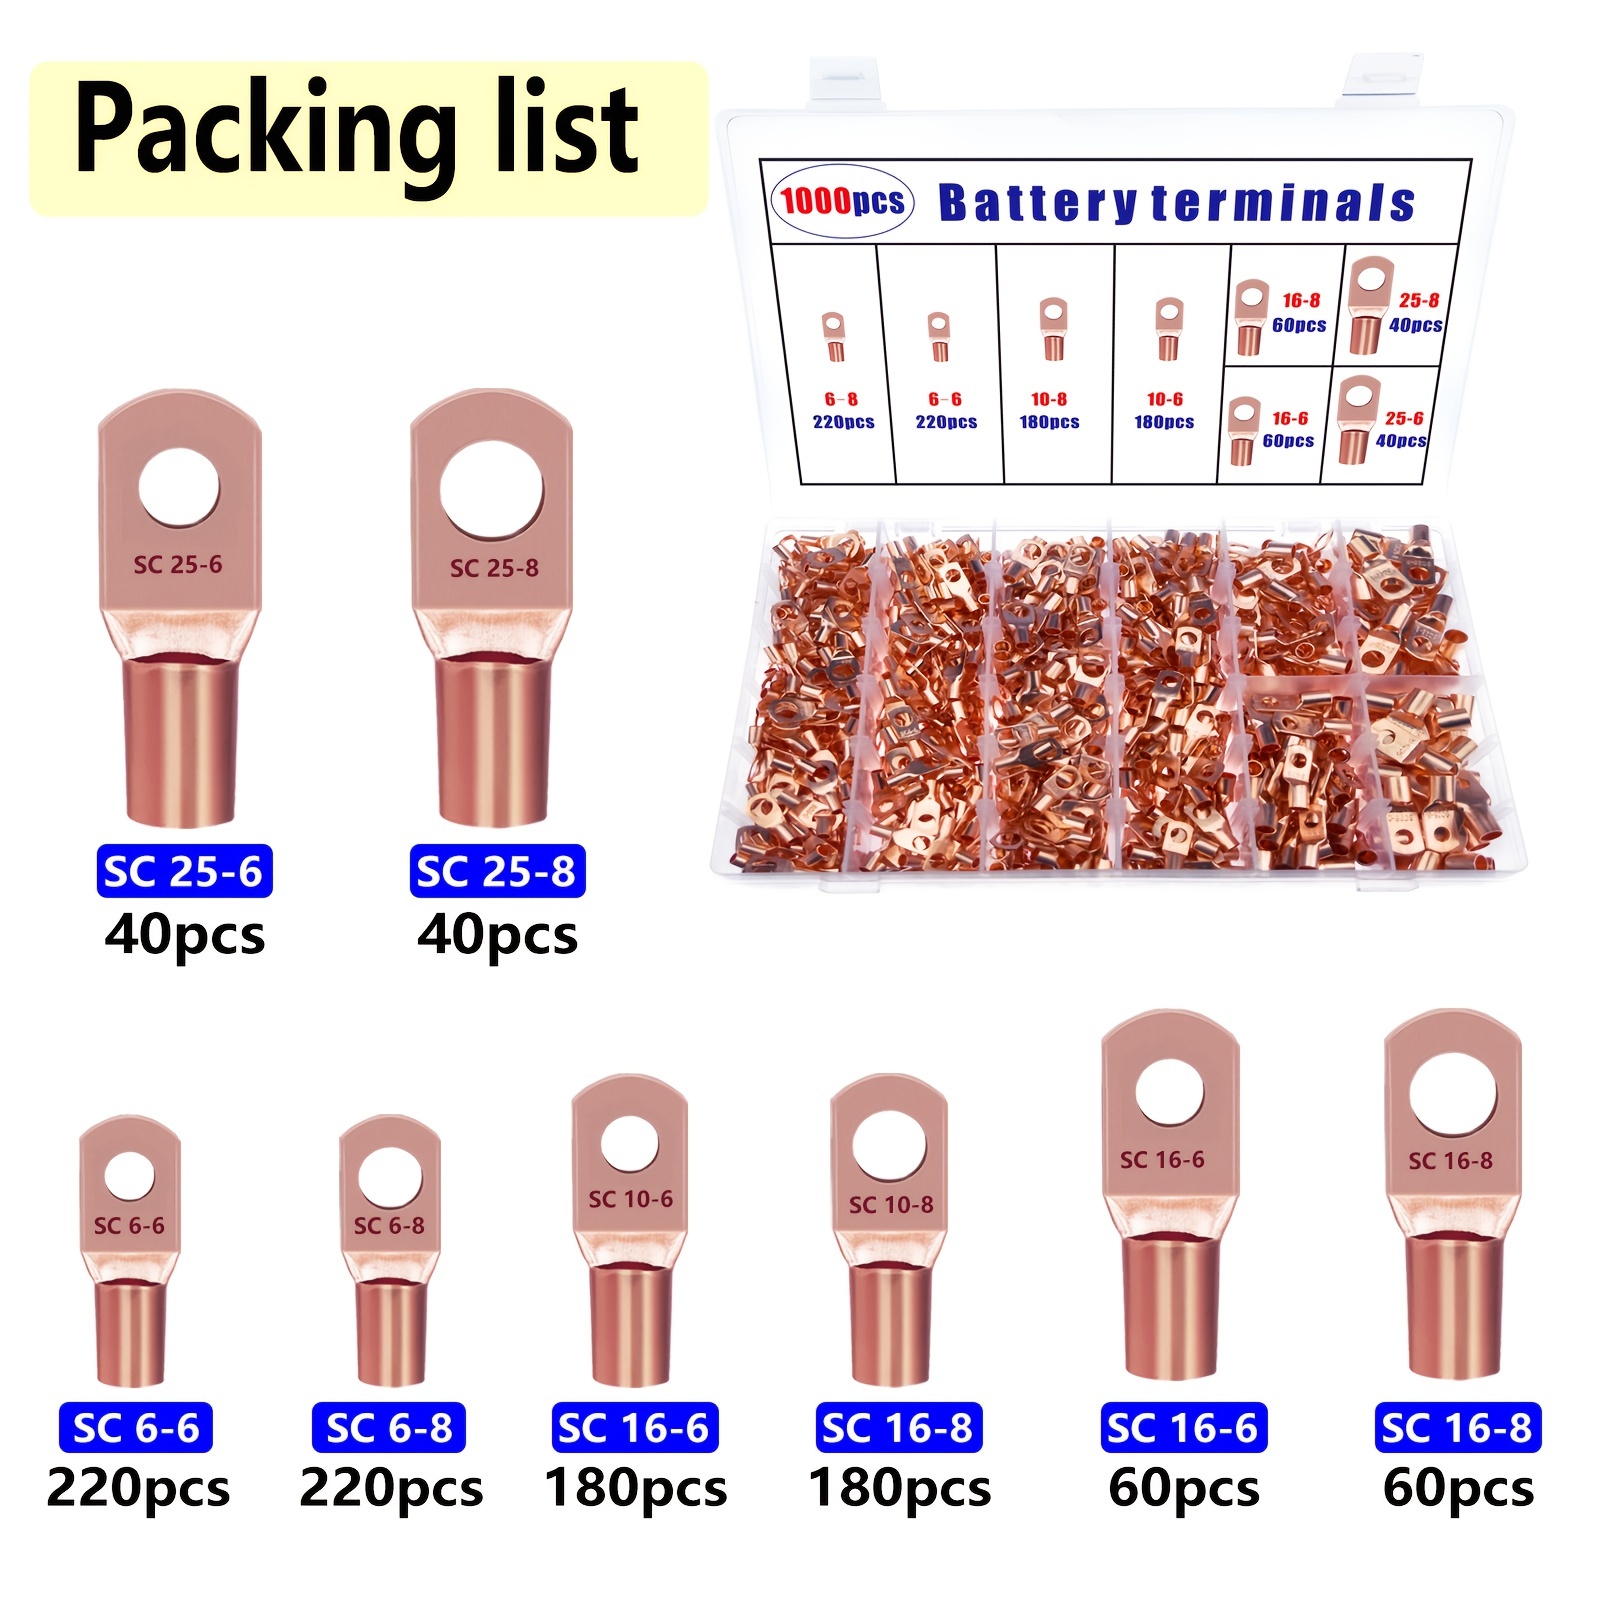 1000pcs Copper Terminal Box Sc Series Bare Terminals Cold Pressed Terminal  Heads Battery Connector Classification Tool Kit Suitable Vehicles Ships Battery  Terminals Battery Cables Battery Terminal Wiring Sheets Battery Connectors  - Industrial